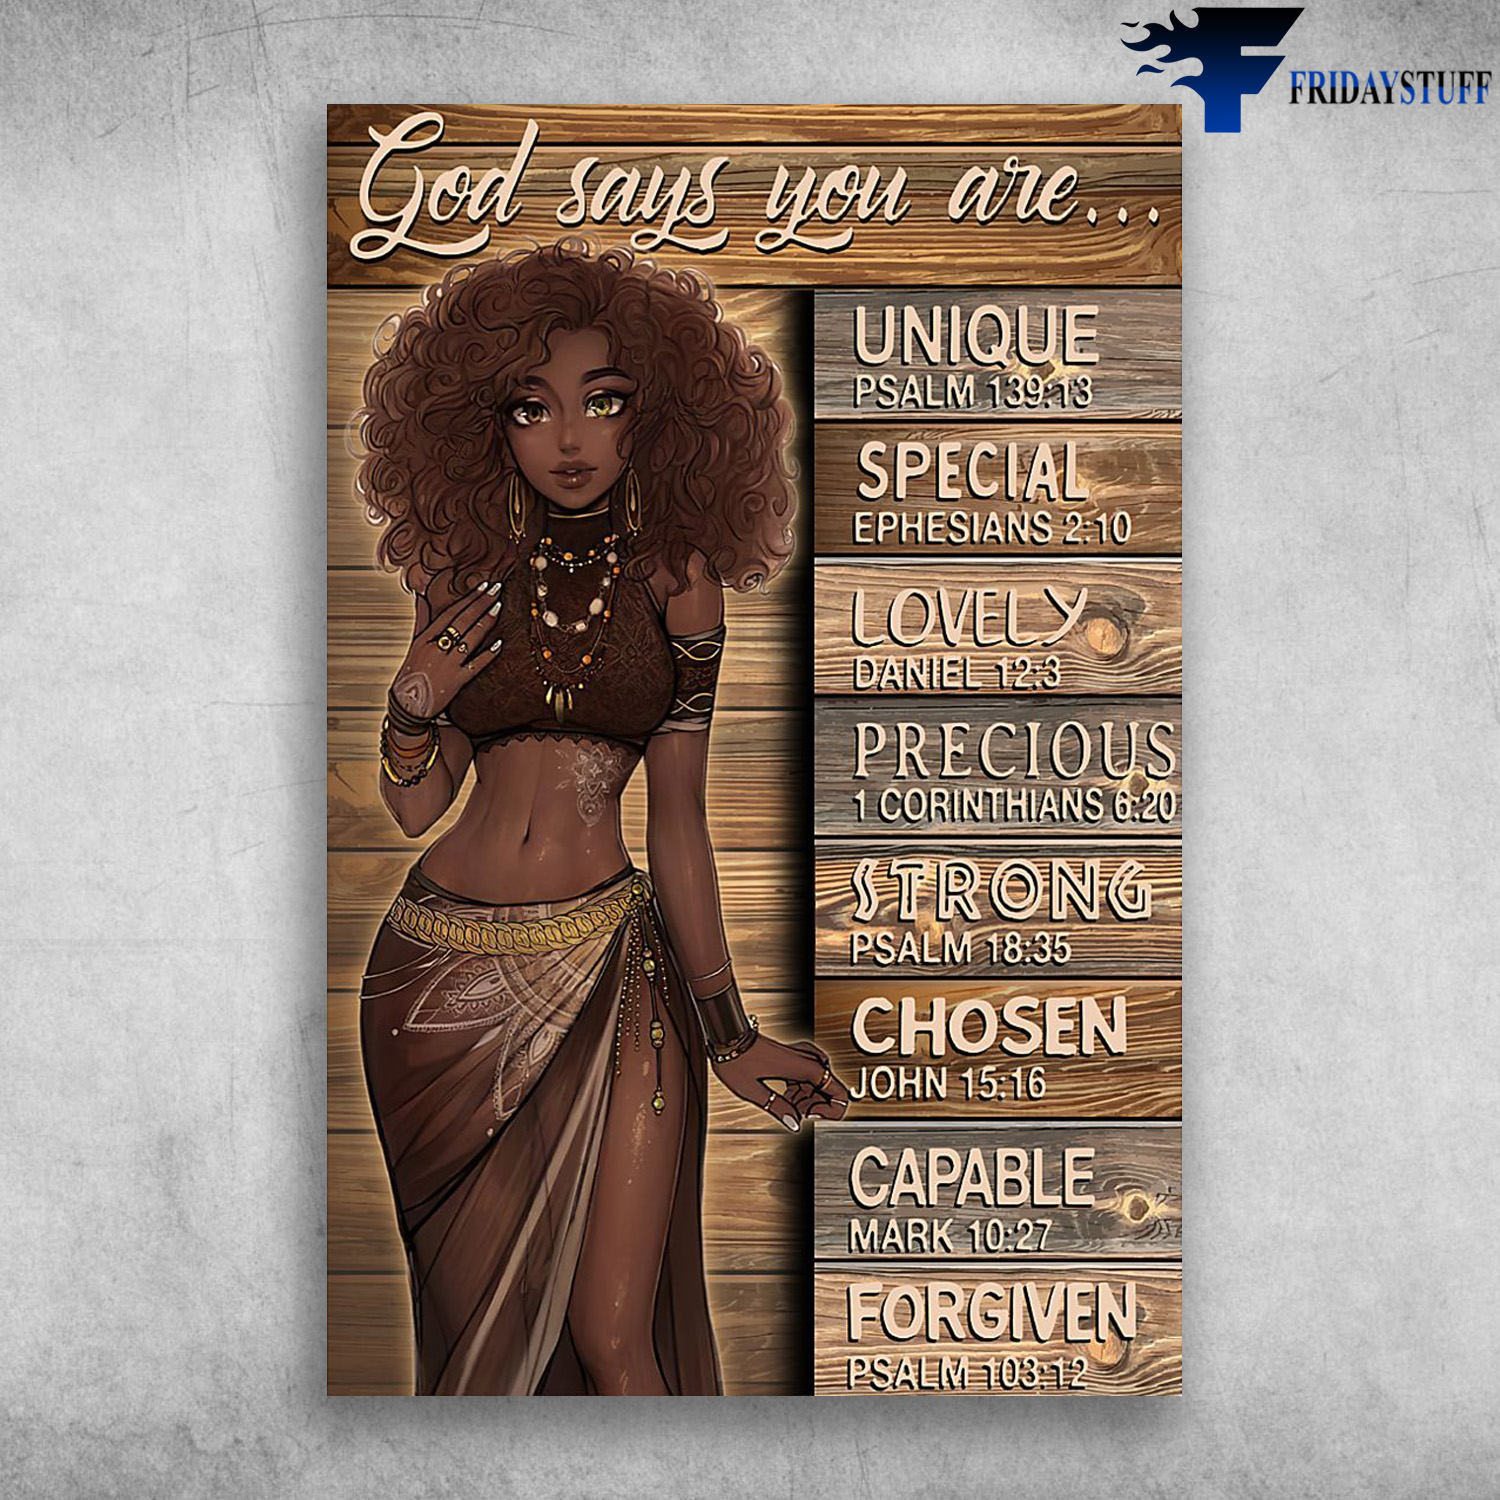 Beautiful Woman Of Color - God Says You Are Unique, Special, Lovely